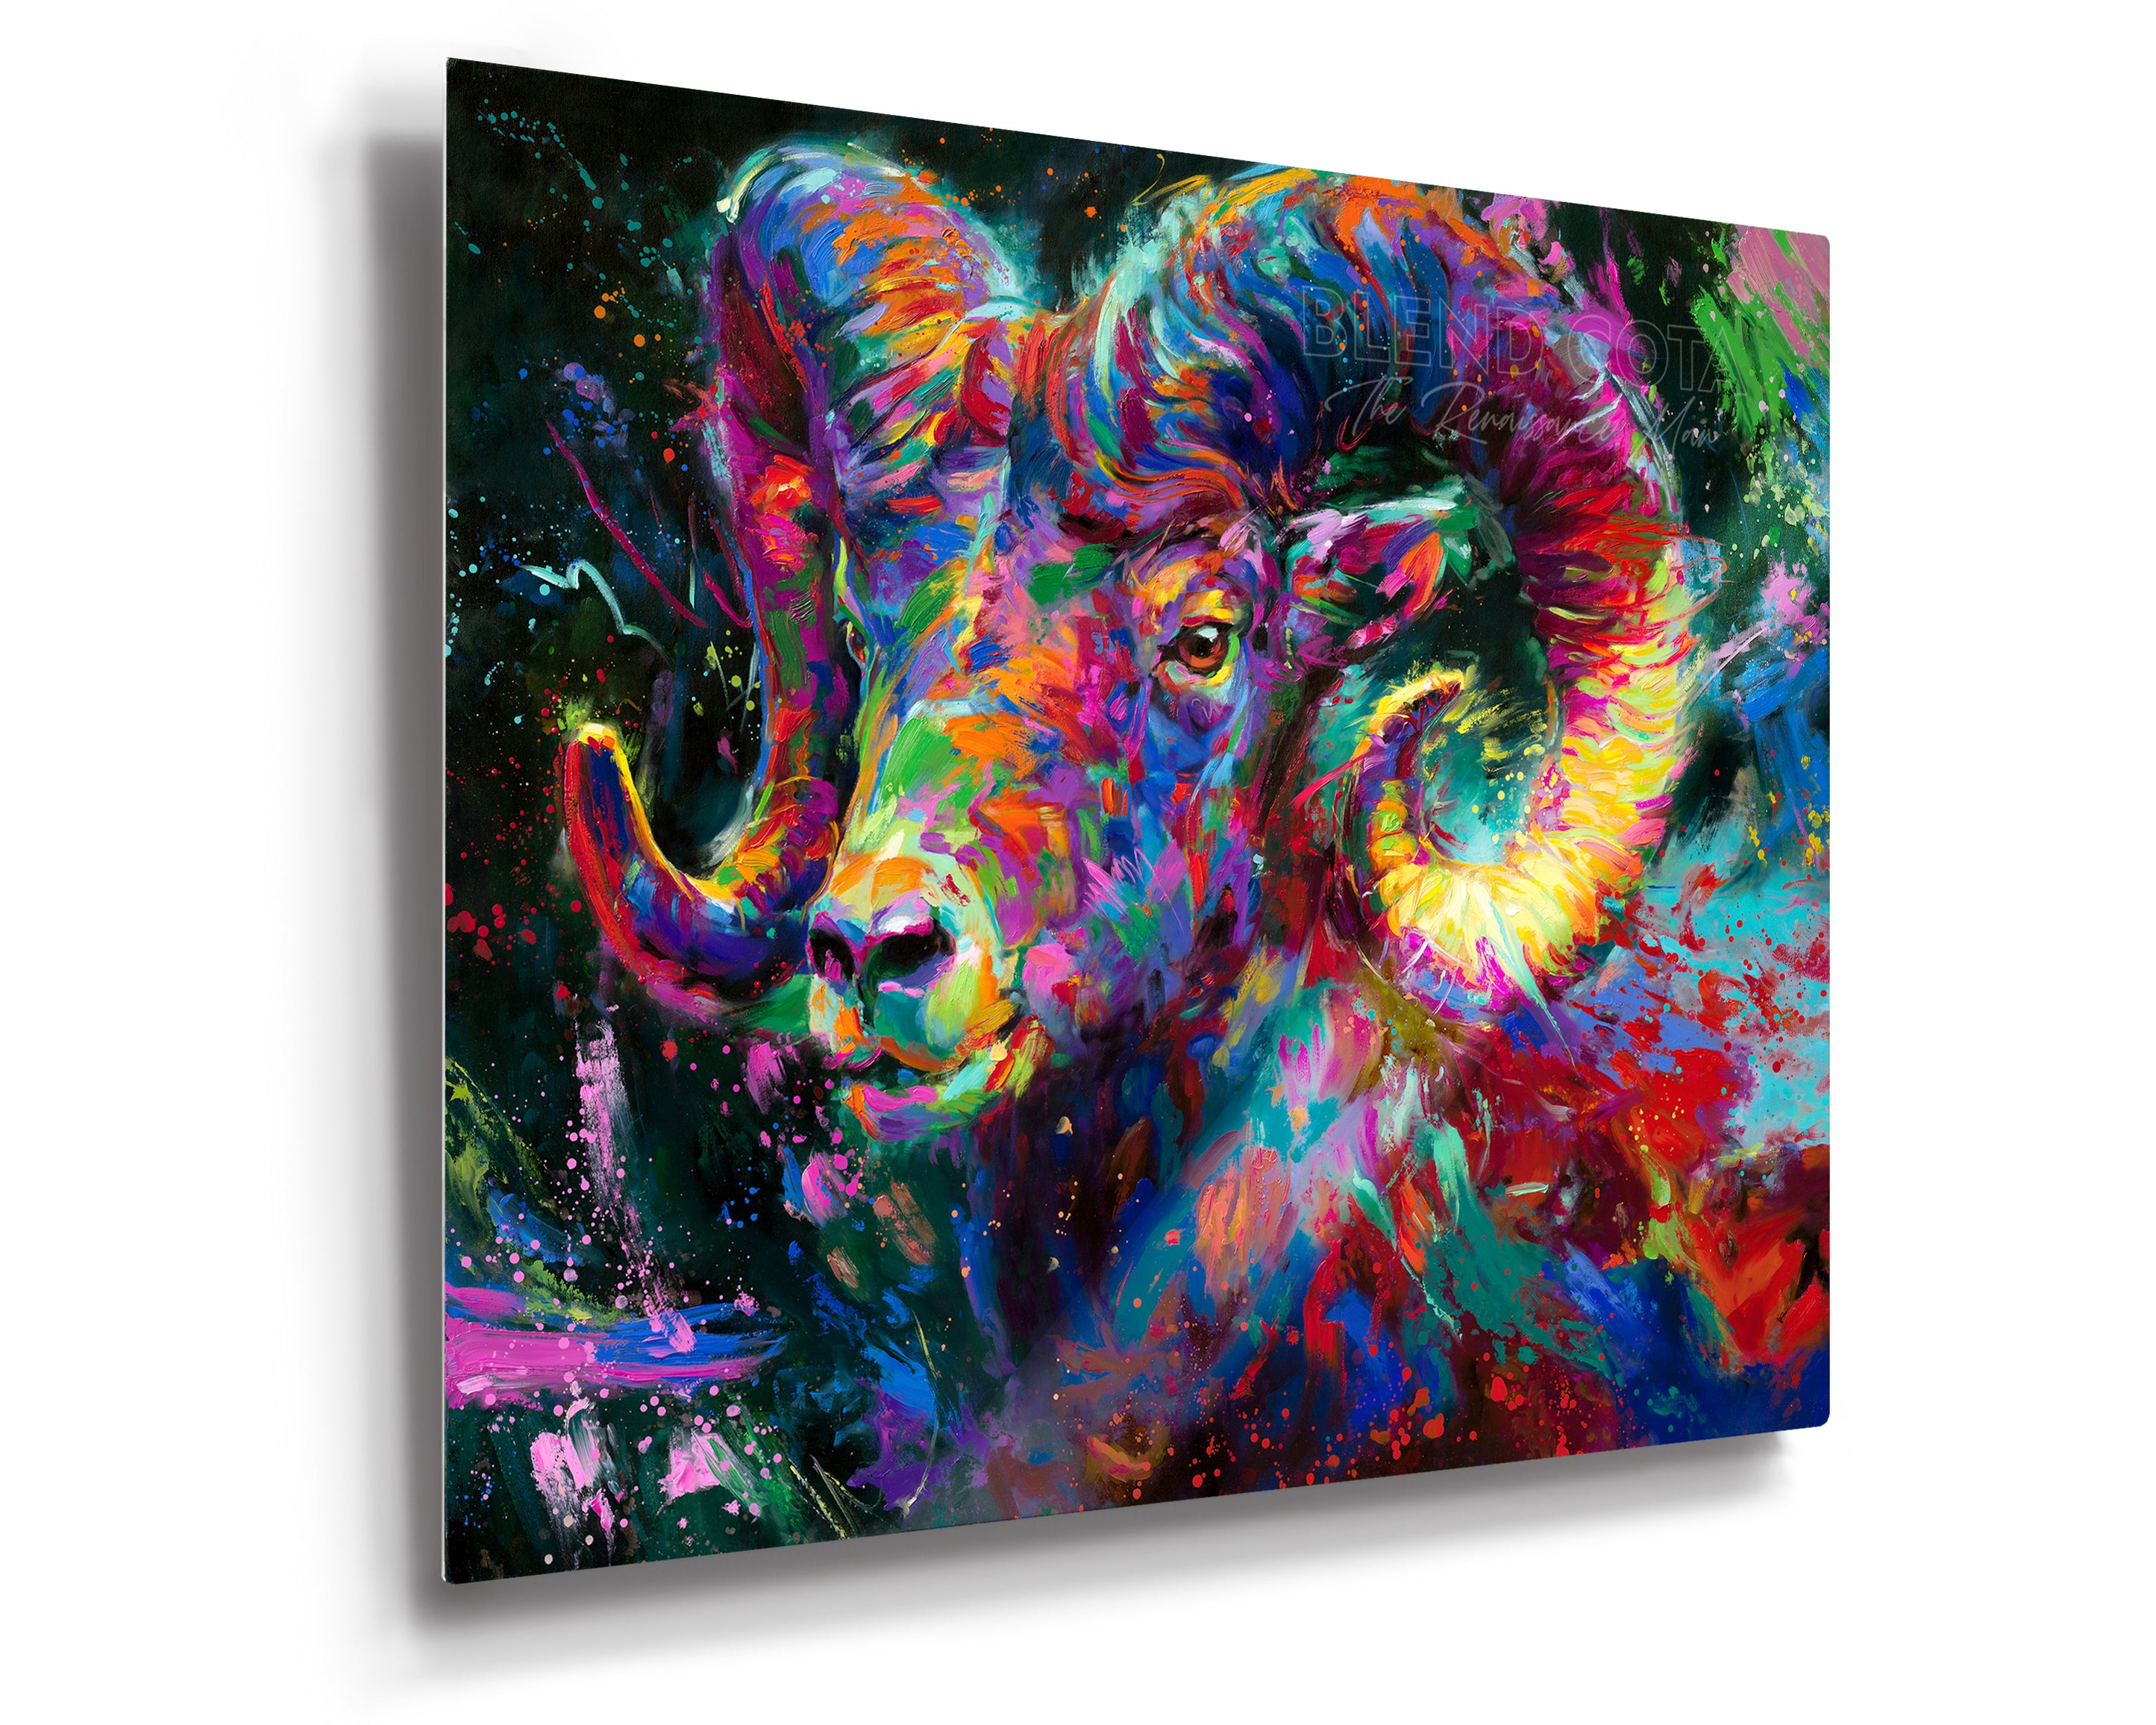 The Ram Spirit painted by Blend Cota Limited Edition Art on Metal from Blend Cota Studios 